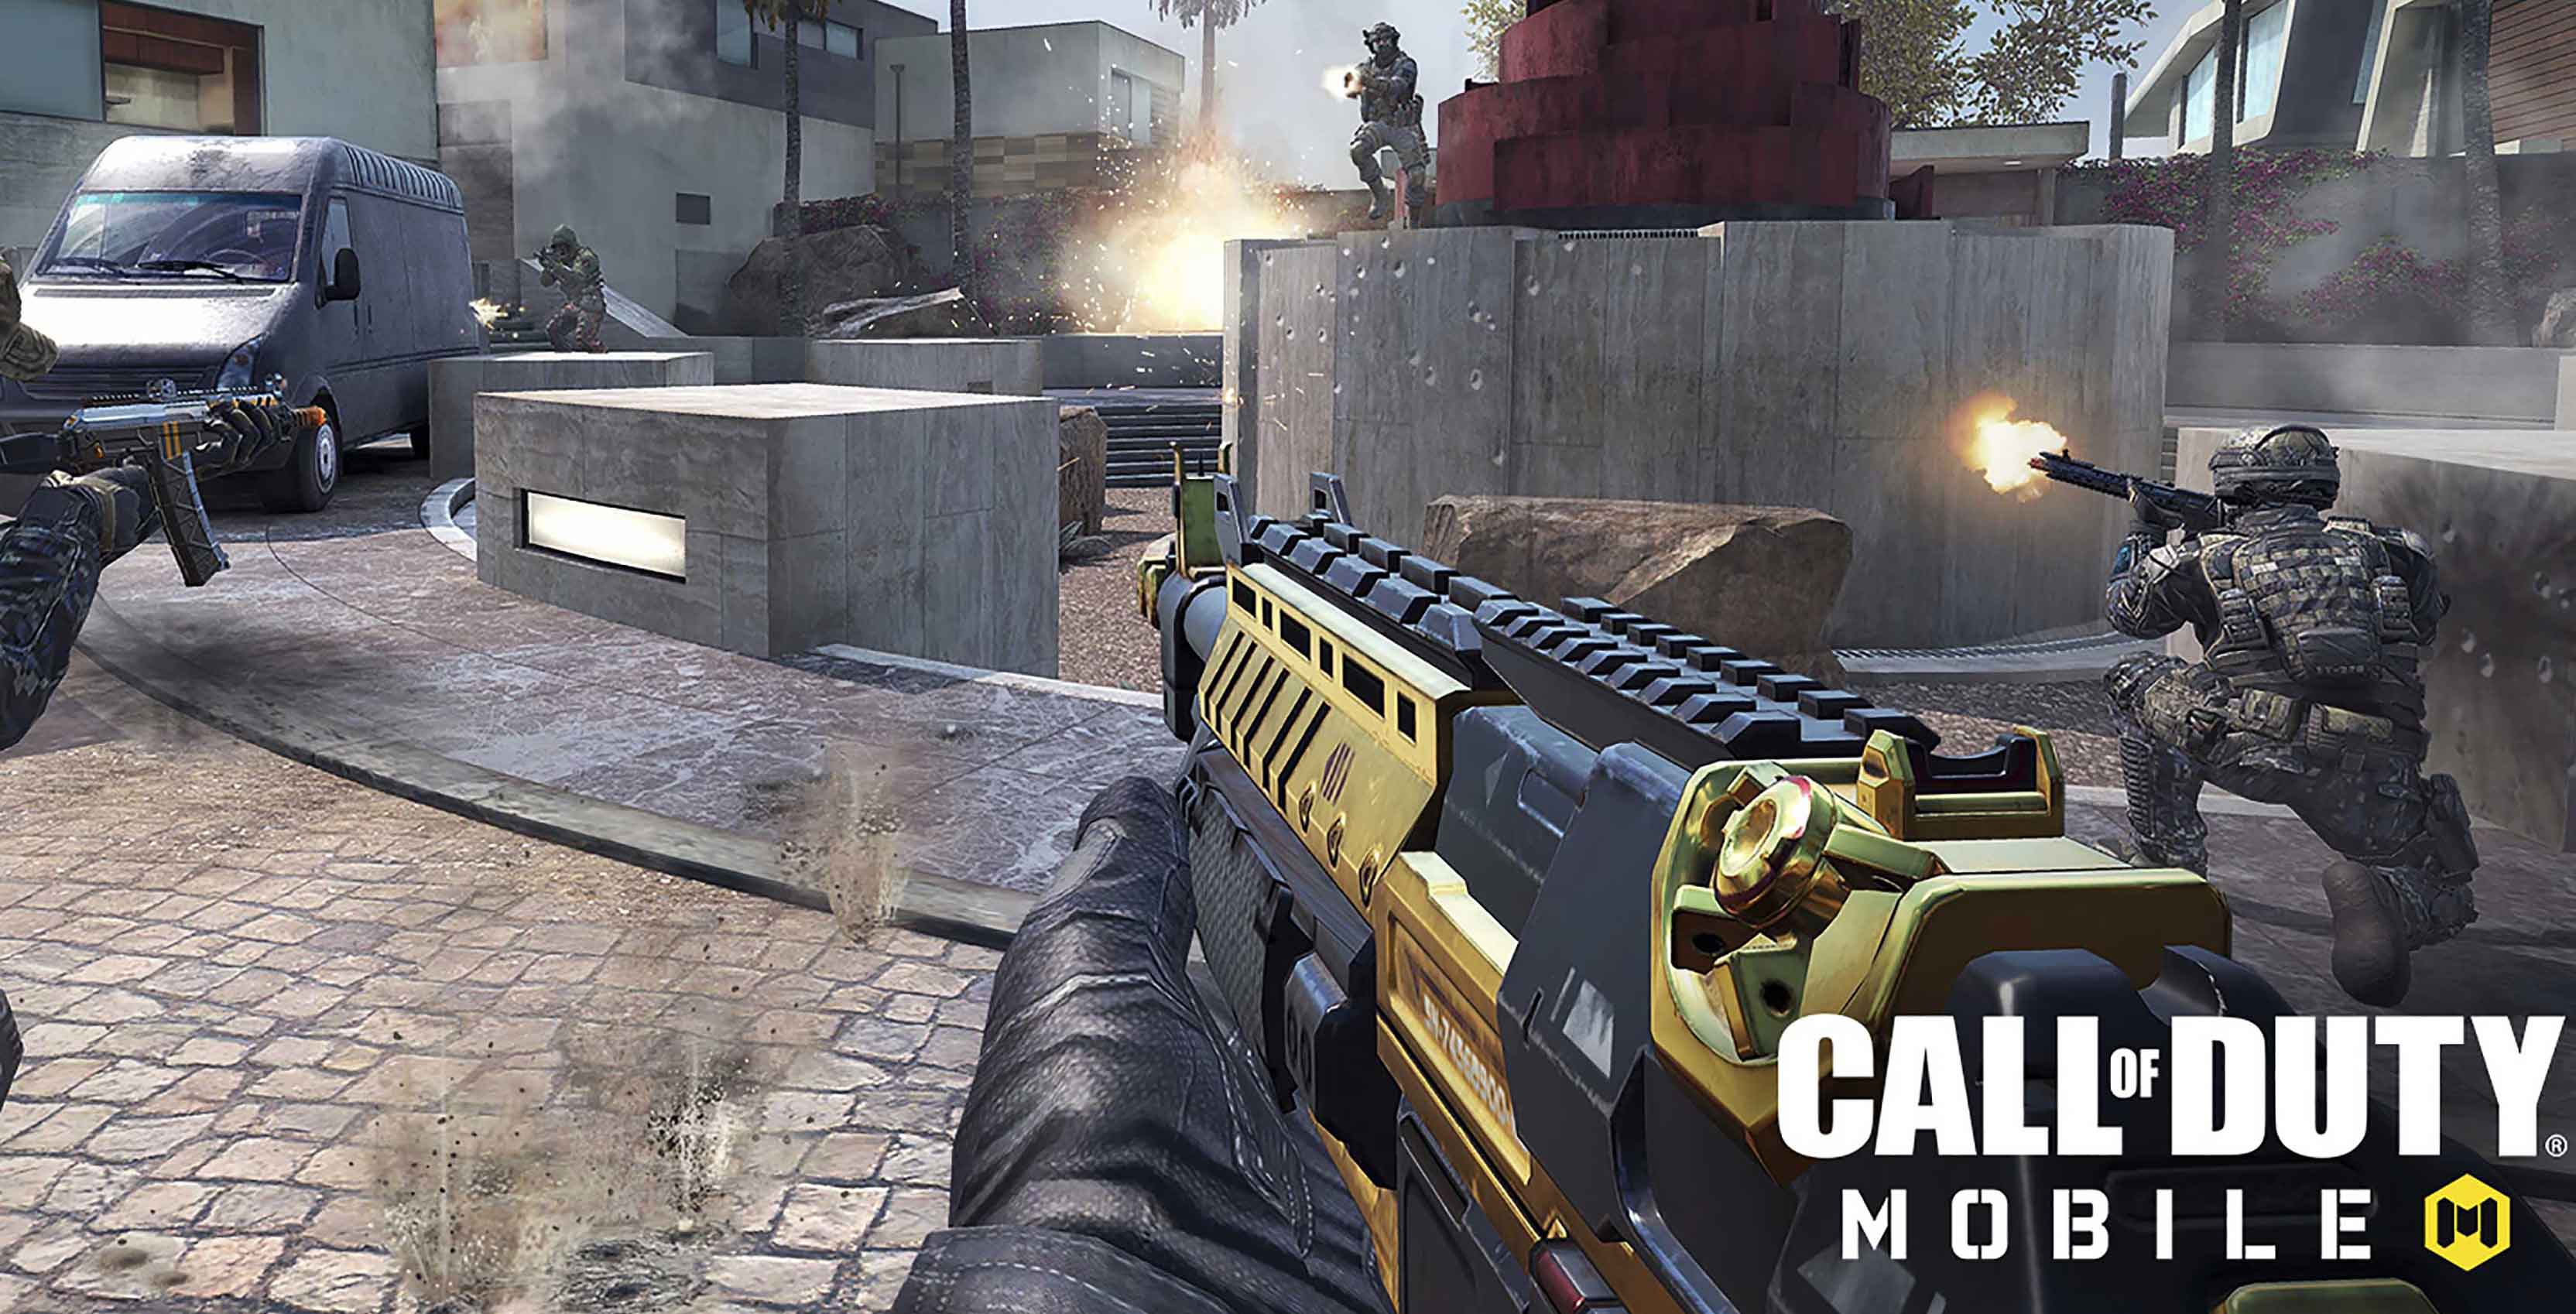 Call of duty 3 mobile. Call of Duty mobile. Игра Call of Duty mobile 2. Call of Duty mobile mobile. Call of Duty 8.